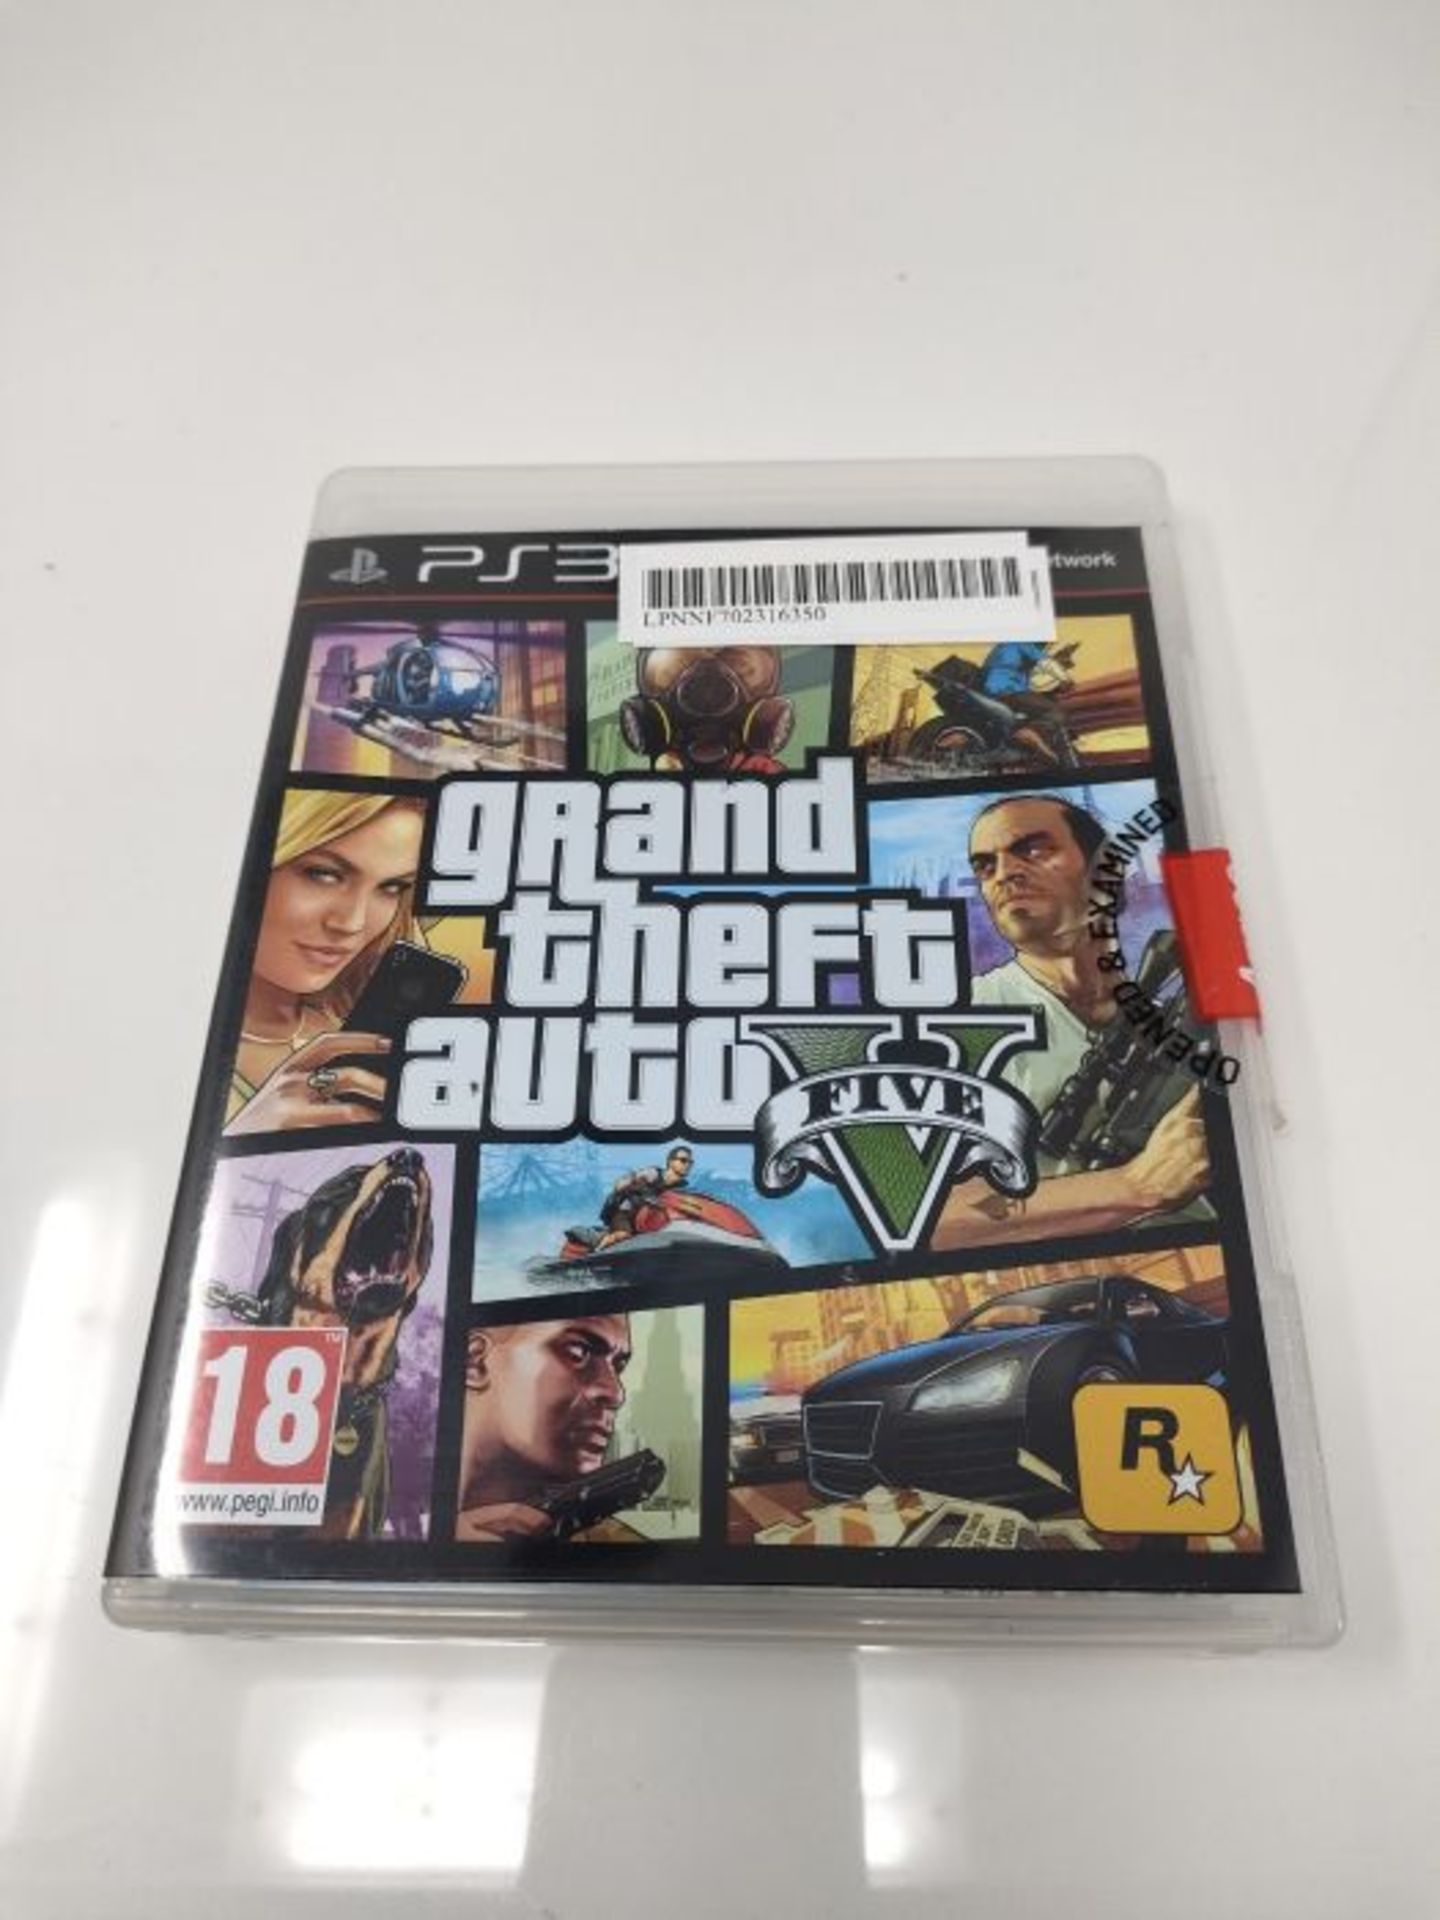 Grand Theft Auto V (PS3) - Image 2 of 3